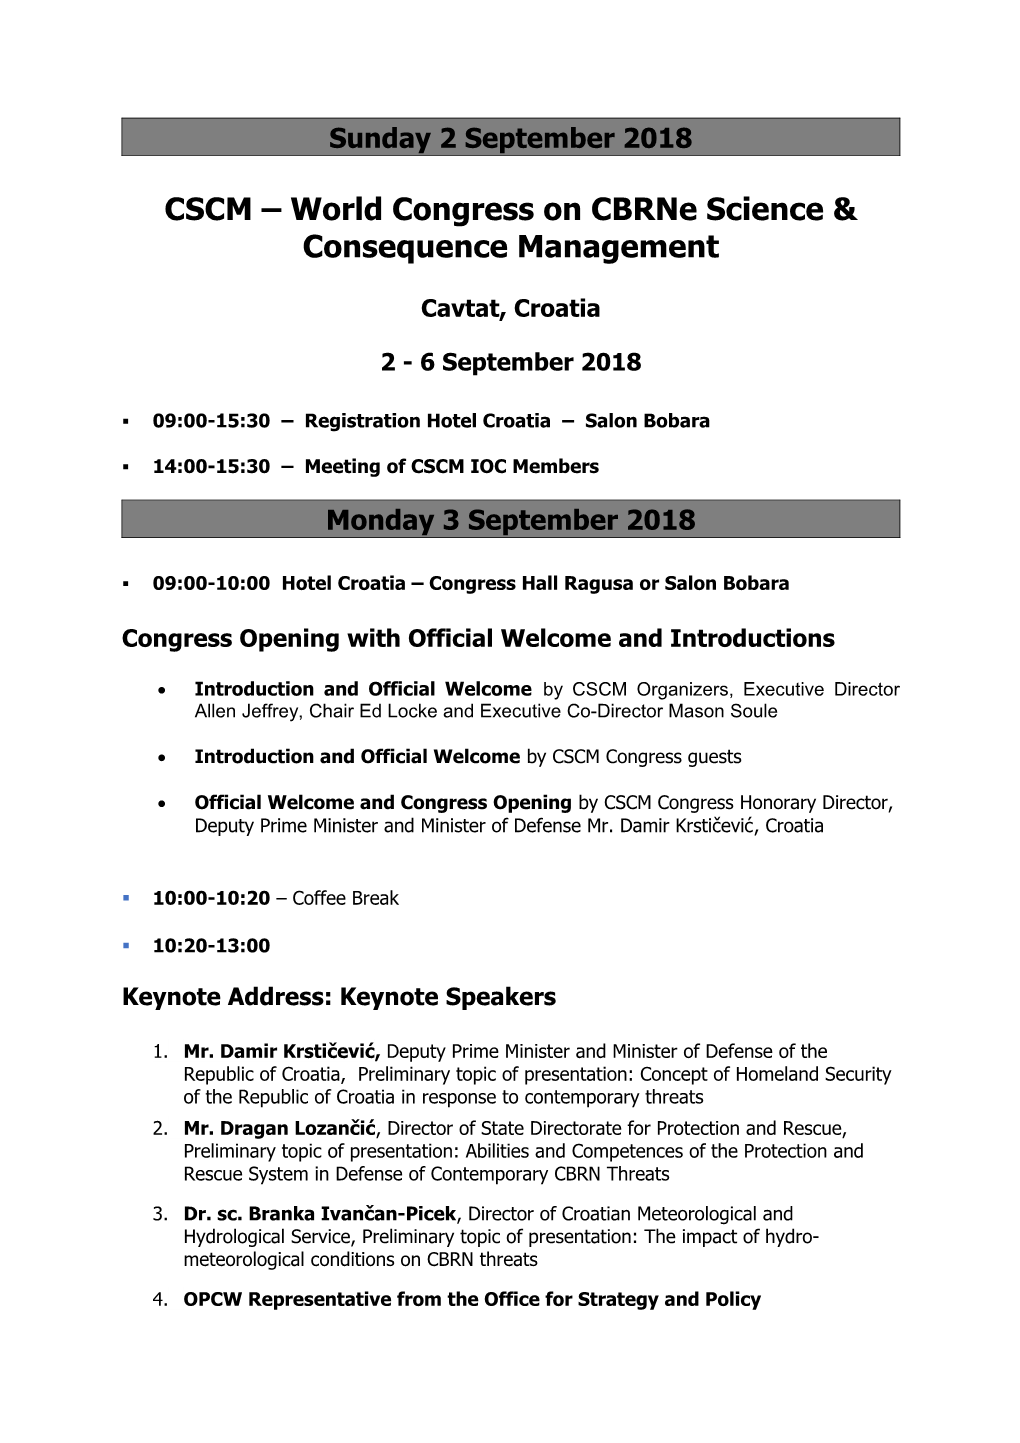 CSCM World Congress on Cbrne Science & Consequence Management